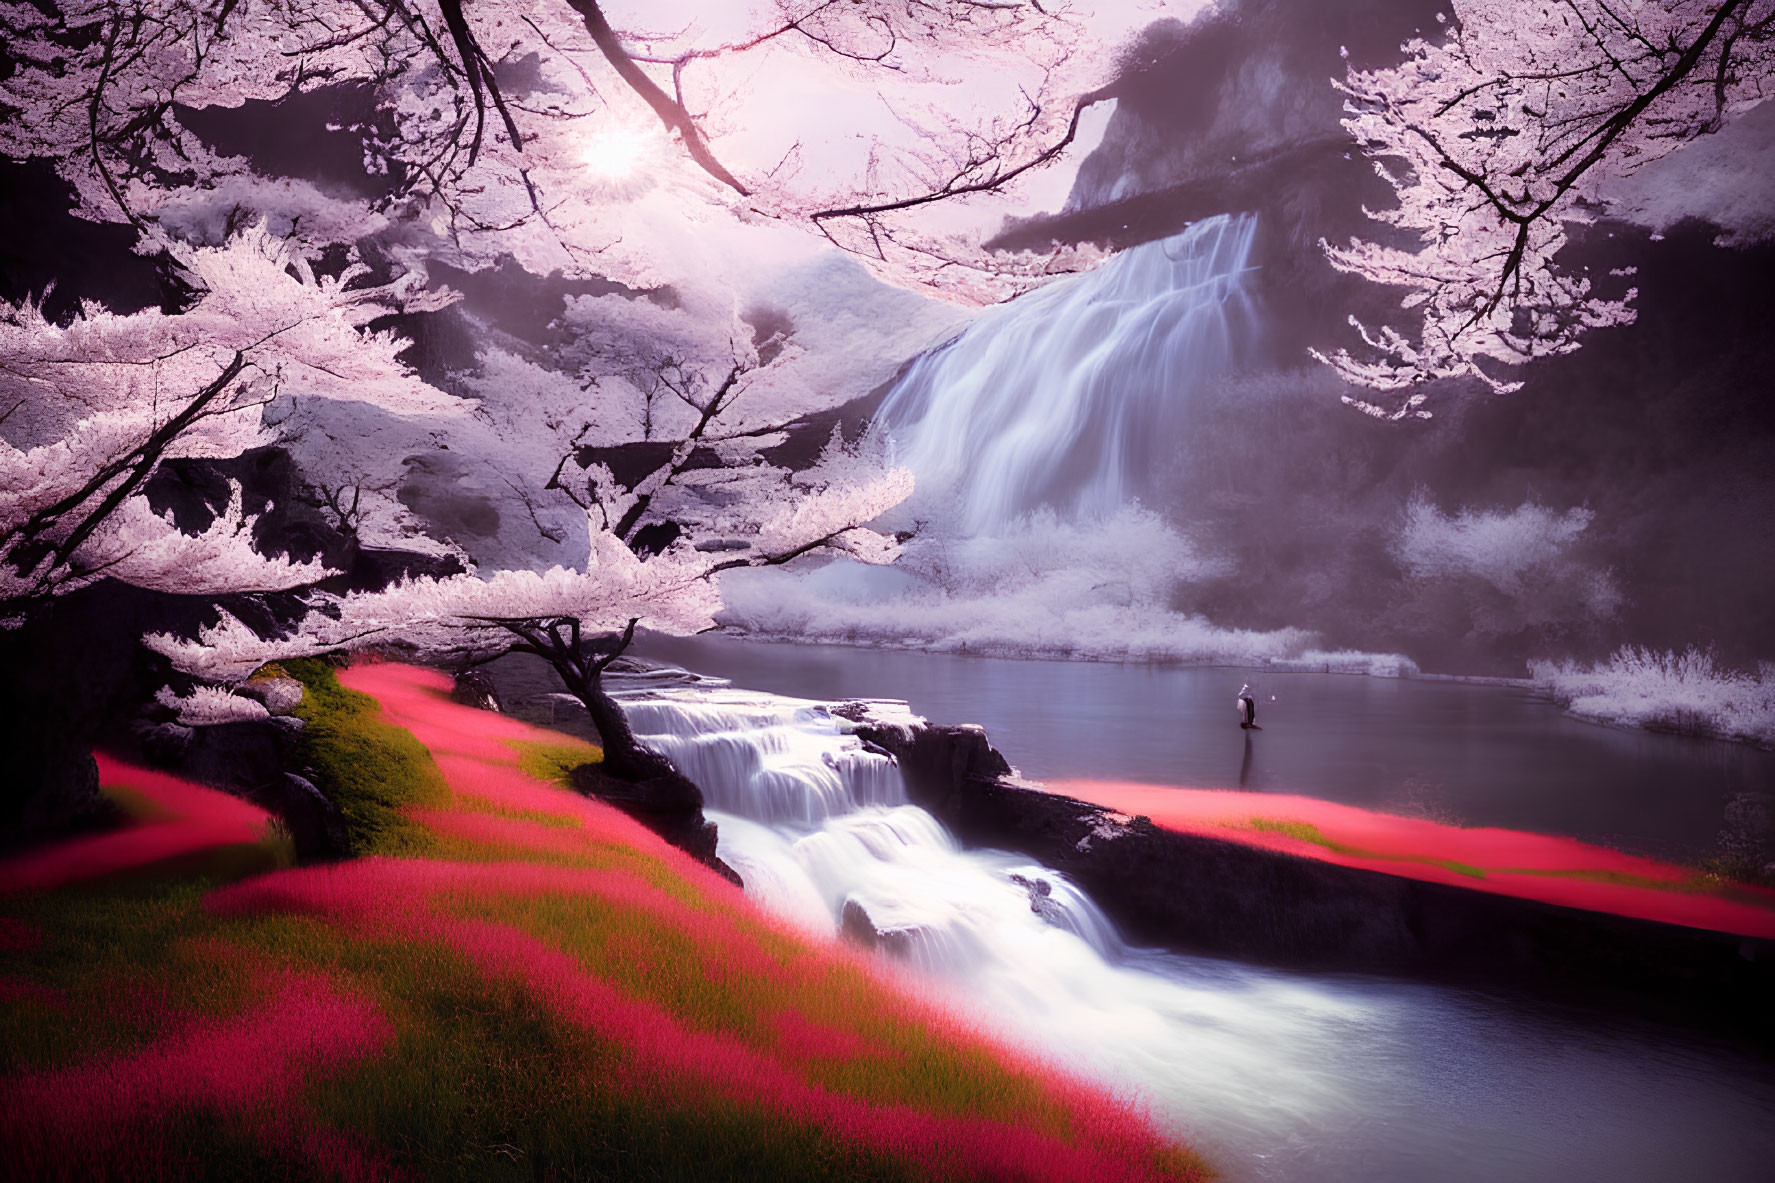 Tranquil waterfall surrounded by pink cherry blossoms and greenery